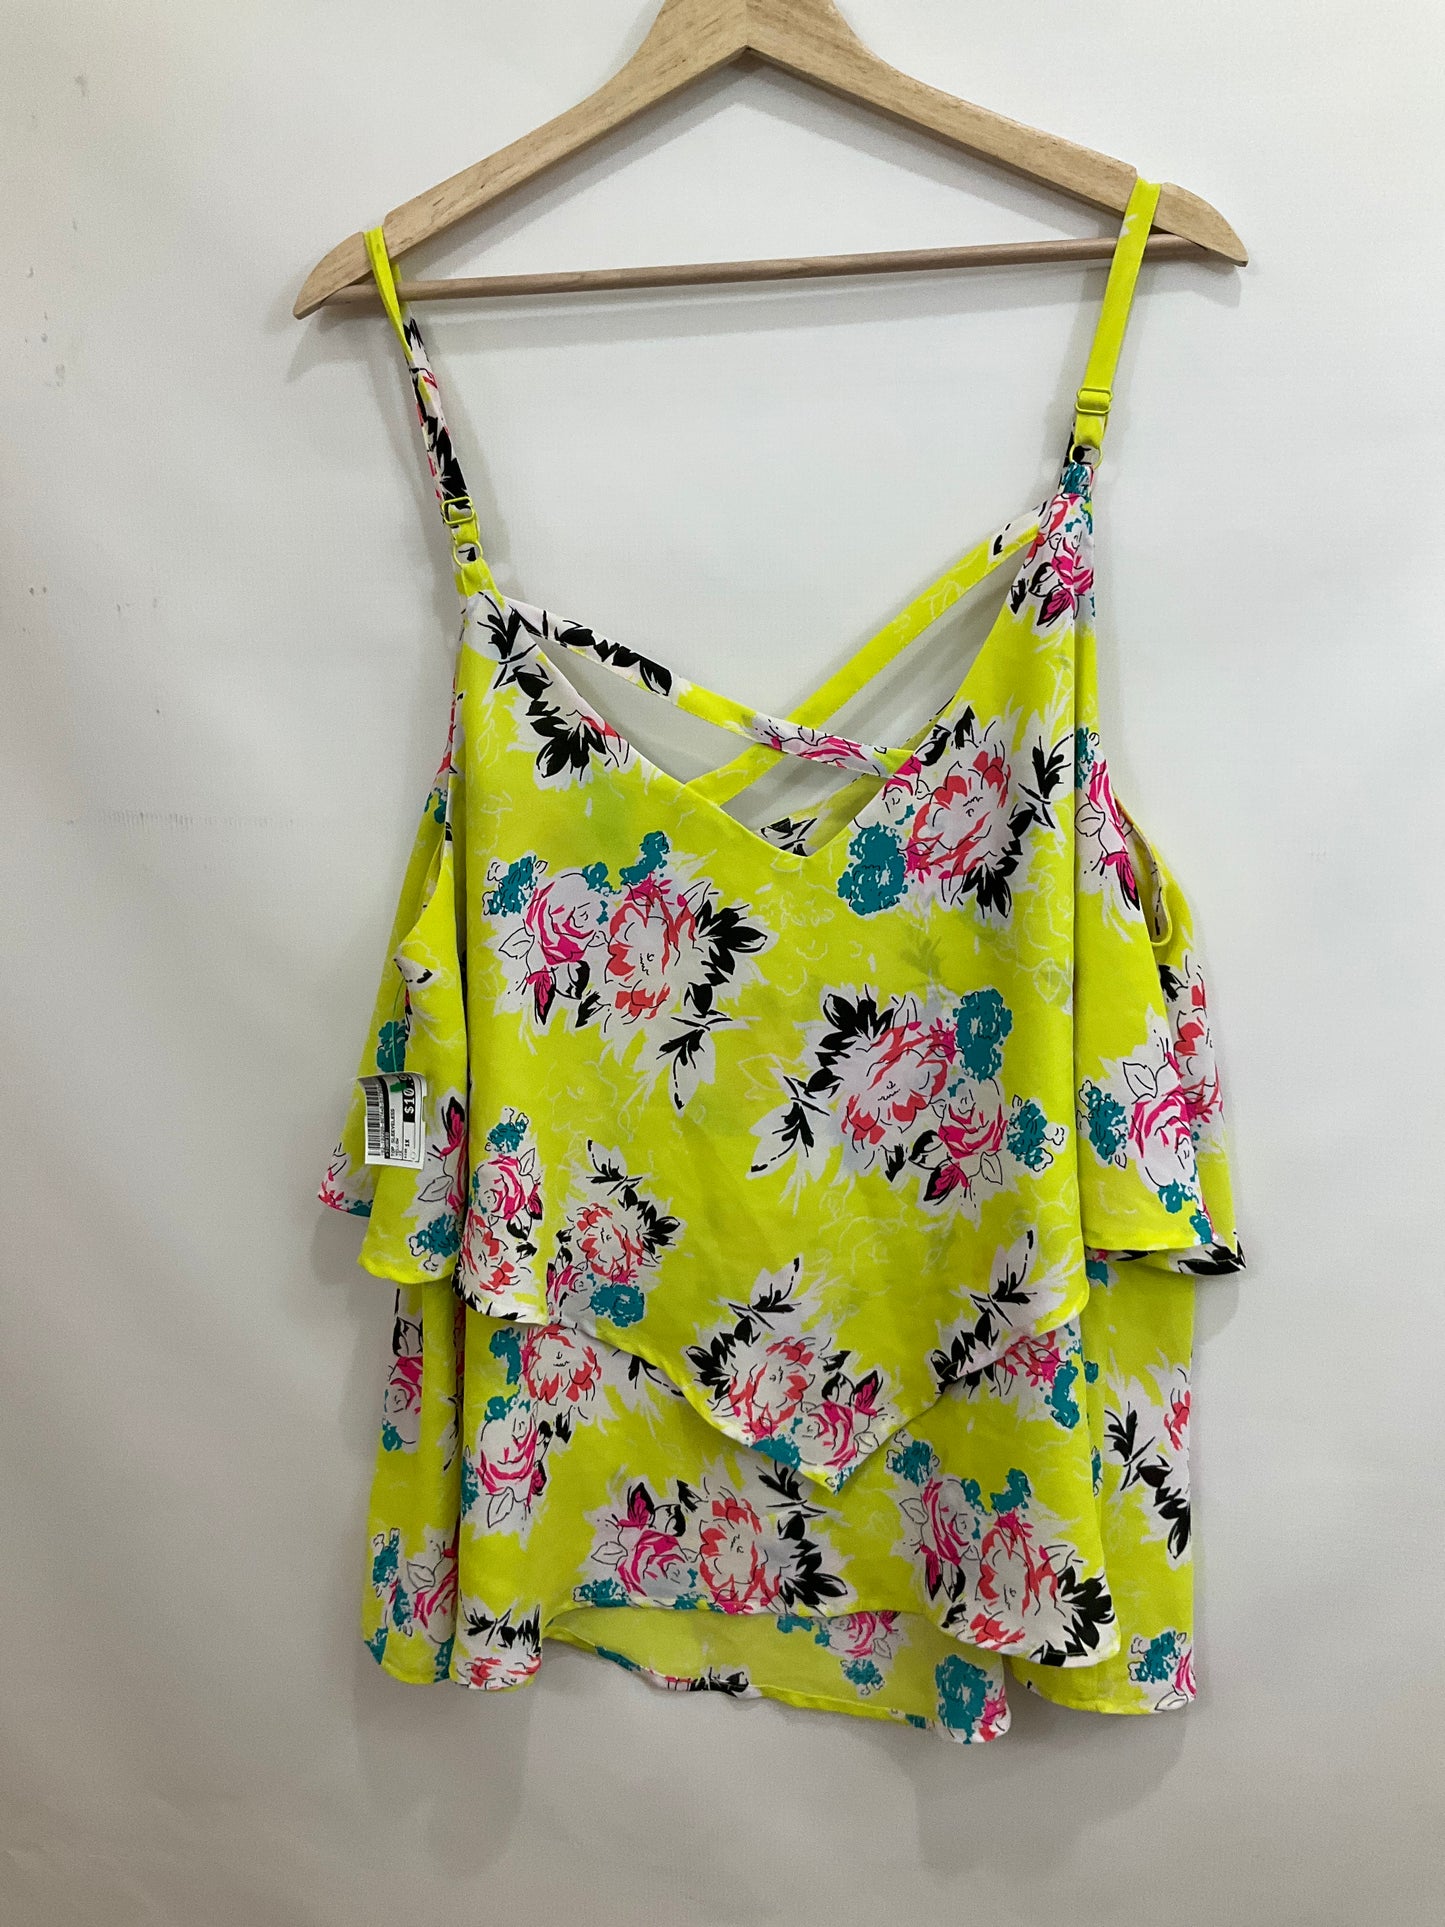 Top Sleeveless By Torrid  Size: 1x